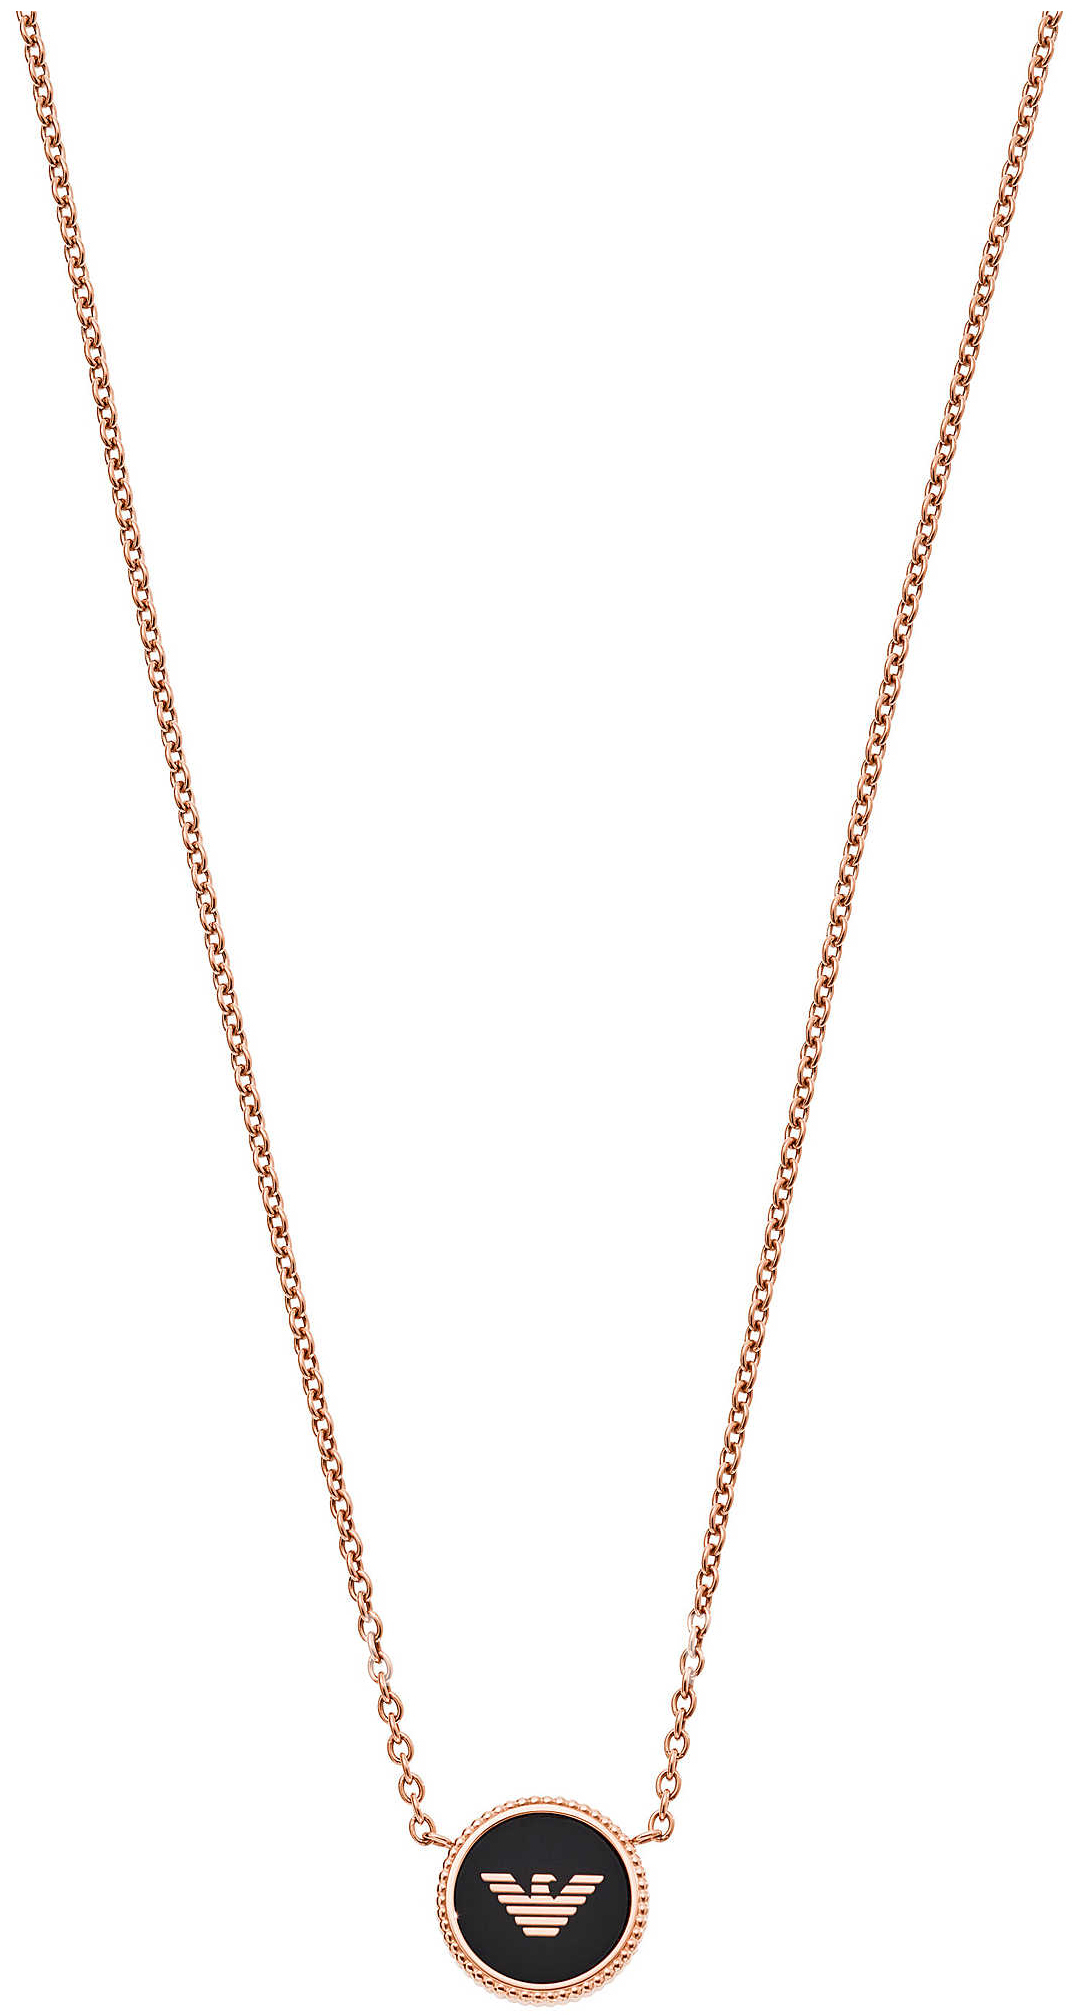 Emporio Armani Necklace Rose gold colored steel EGS2533221